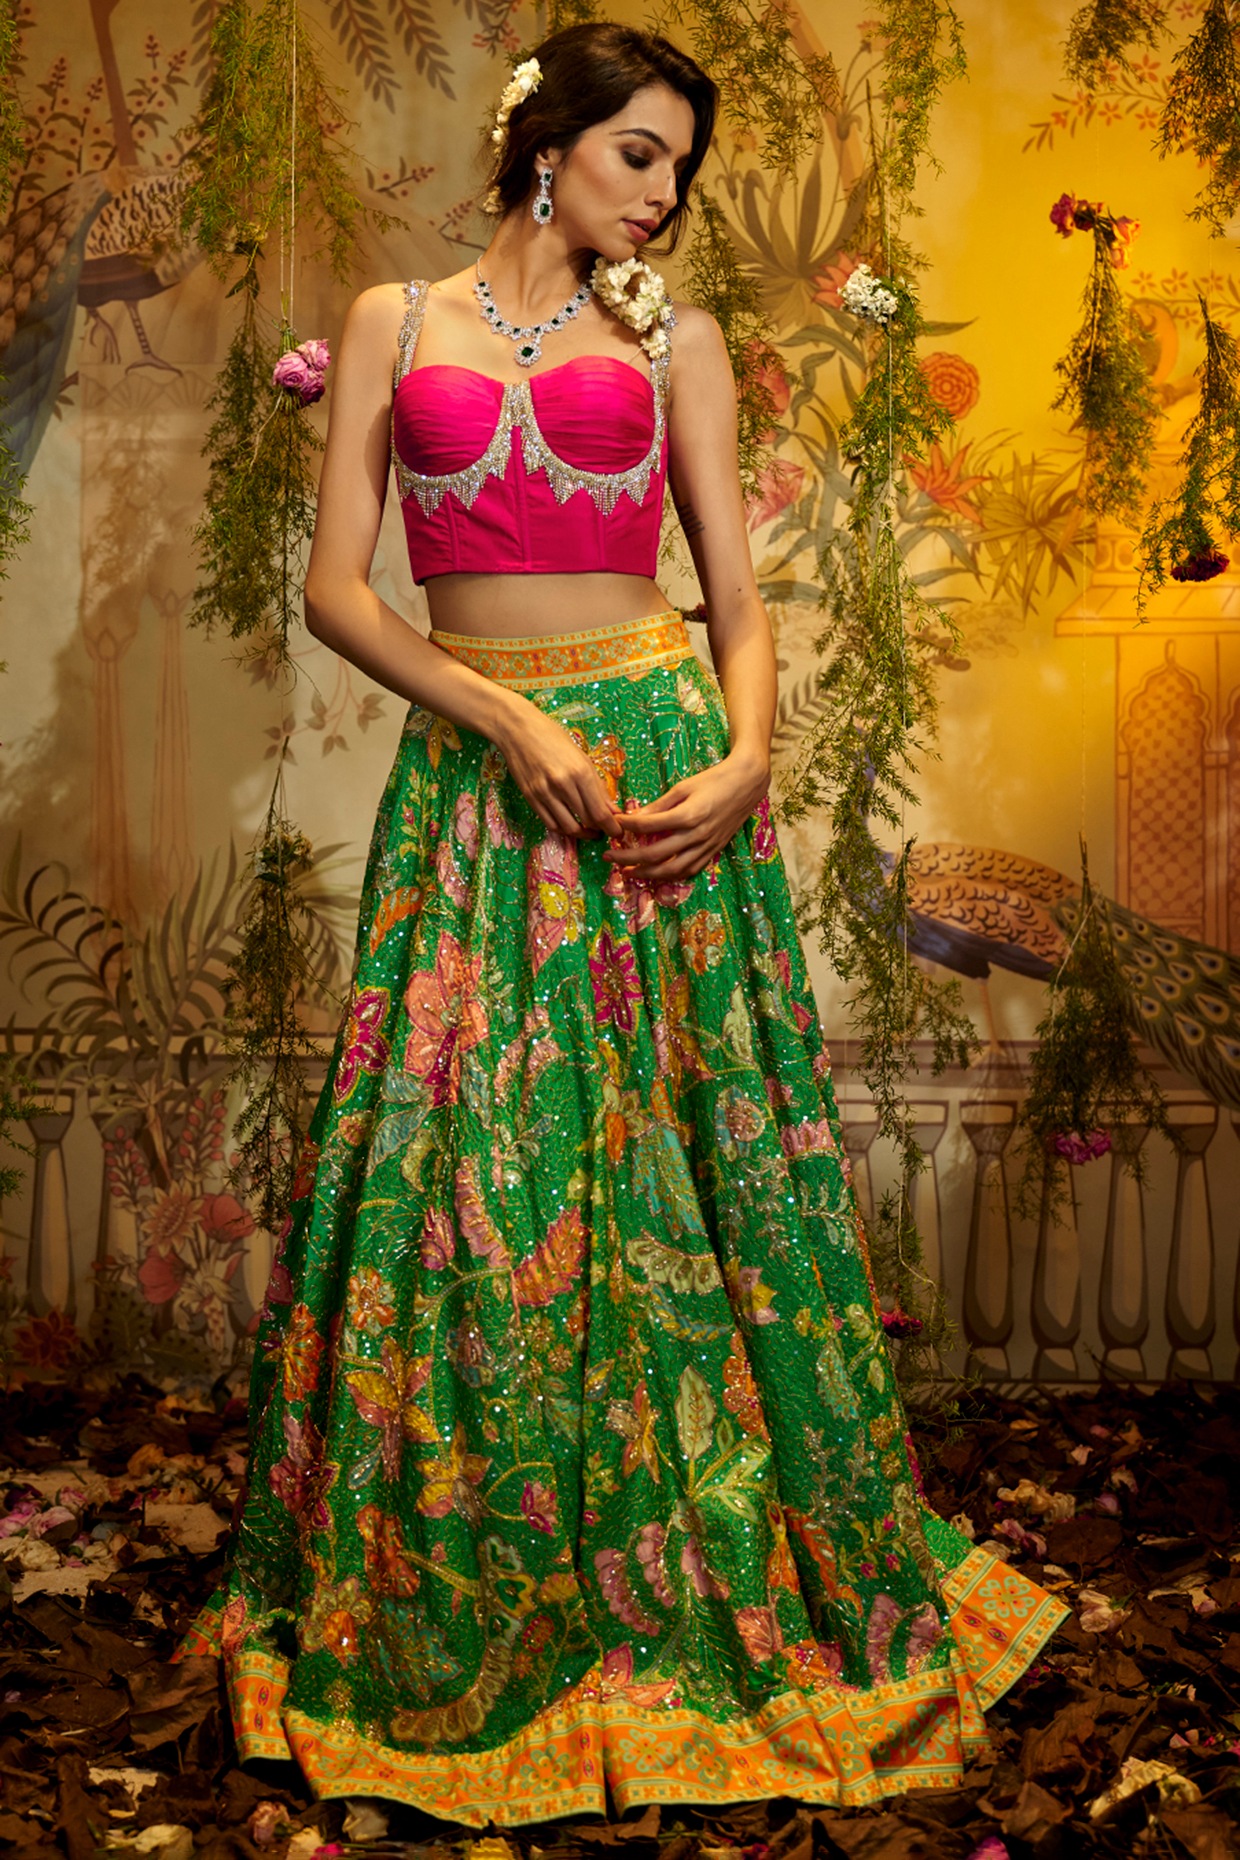 Photo of Bride wearing a pastel pink lehenga with a yellow dupatta and  emerald jewellery.